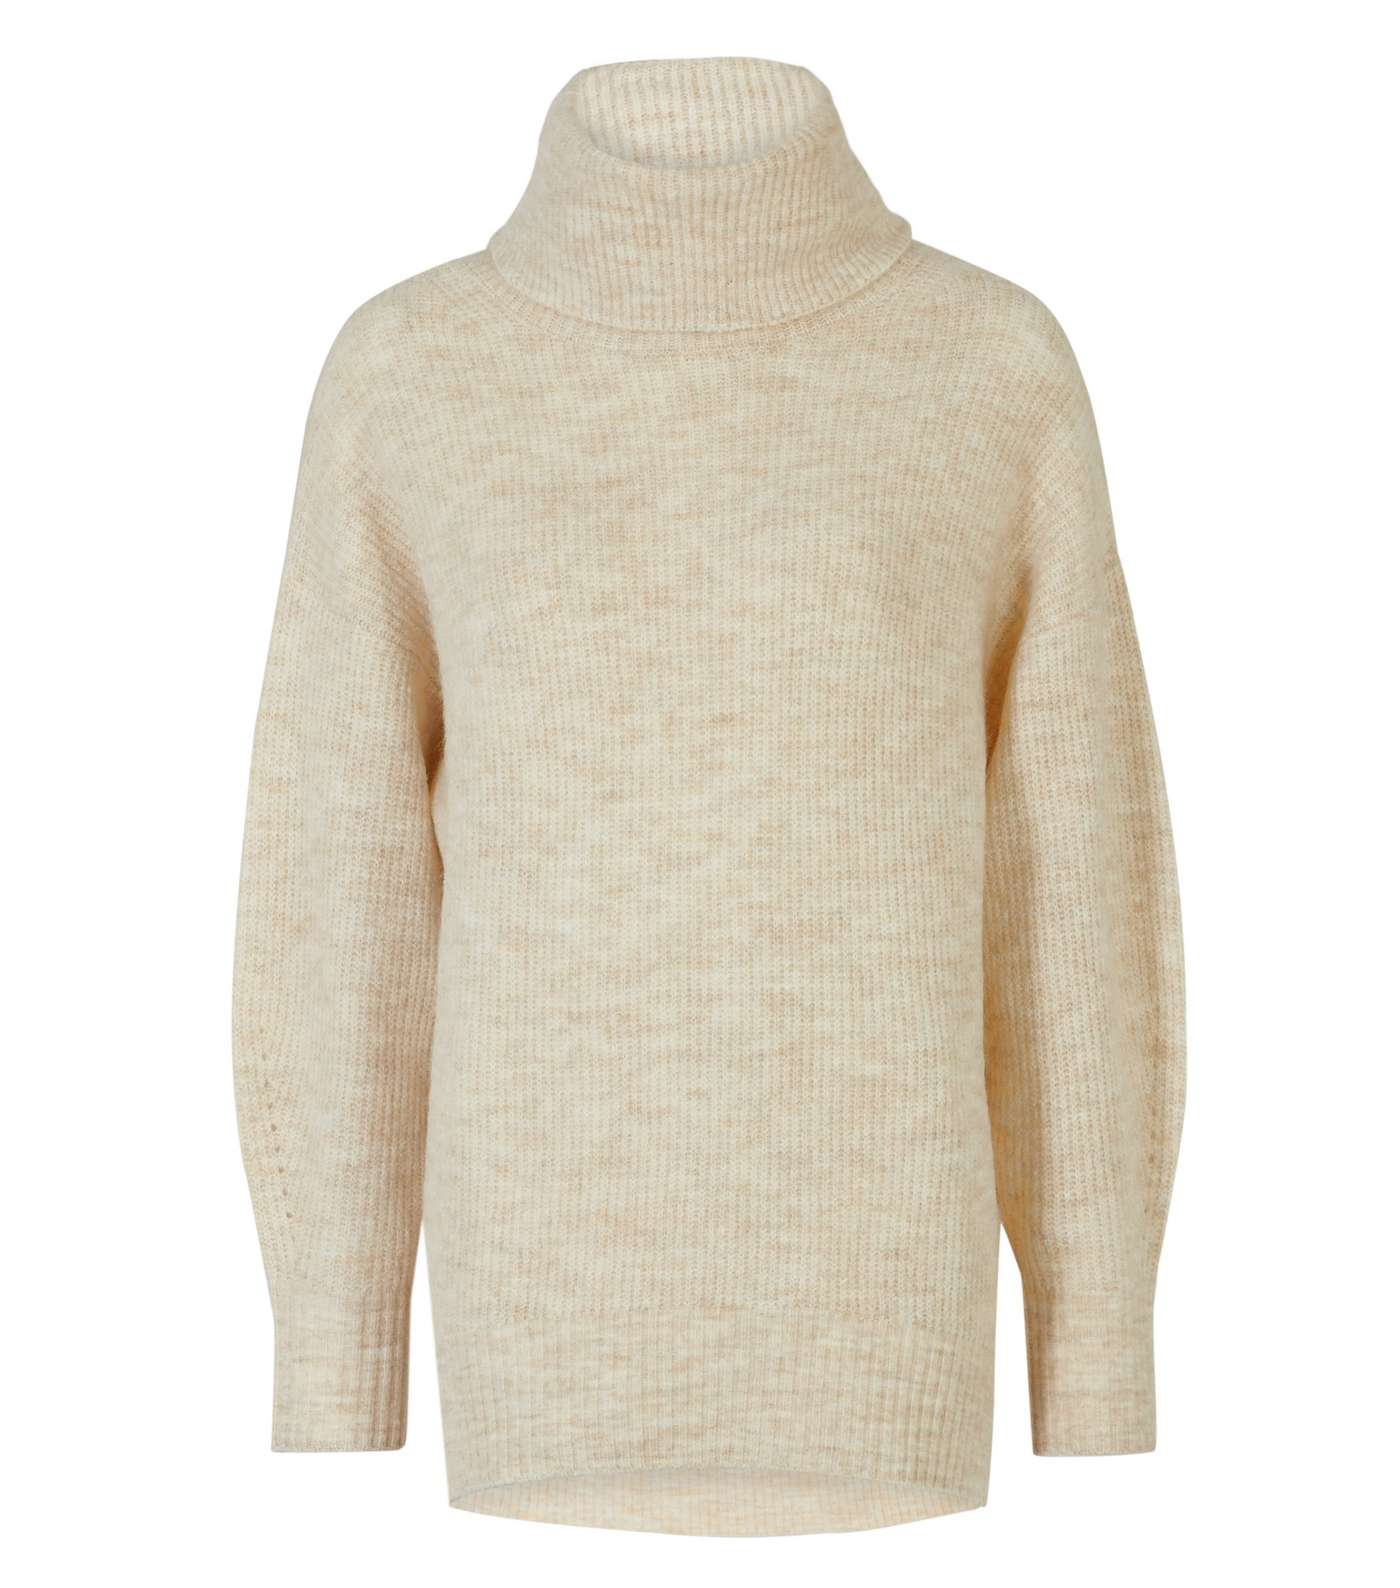 Cream Slouchy Roll Neck Jumper Image 5